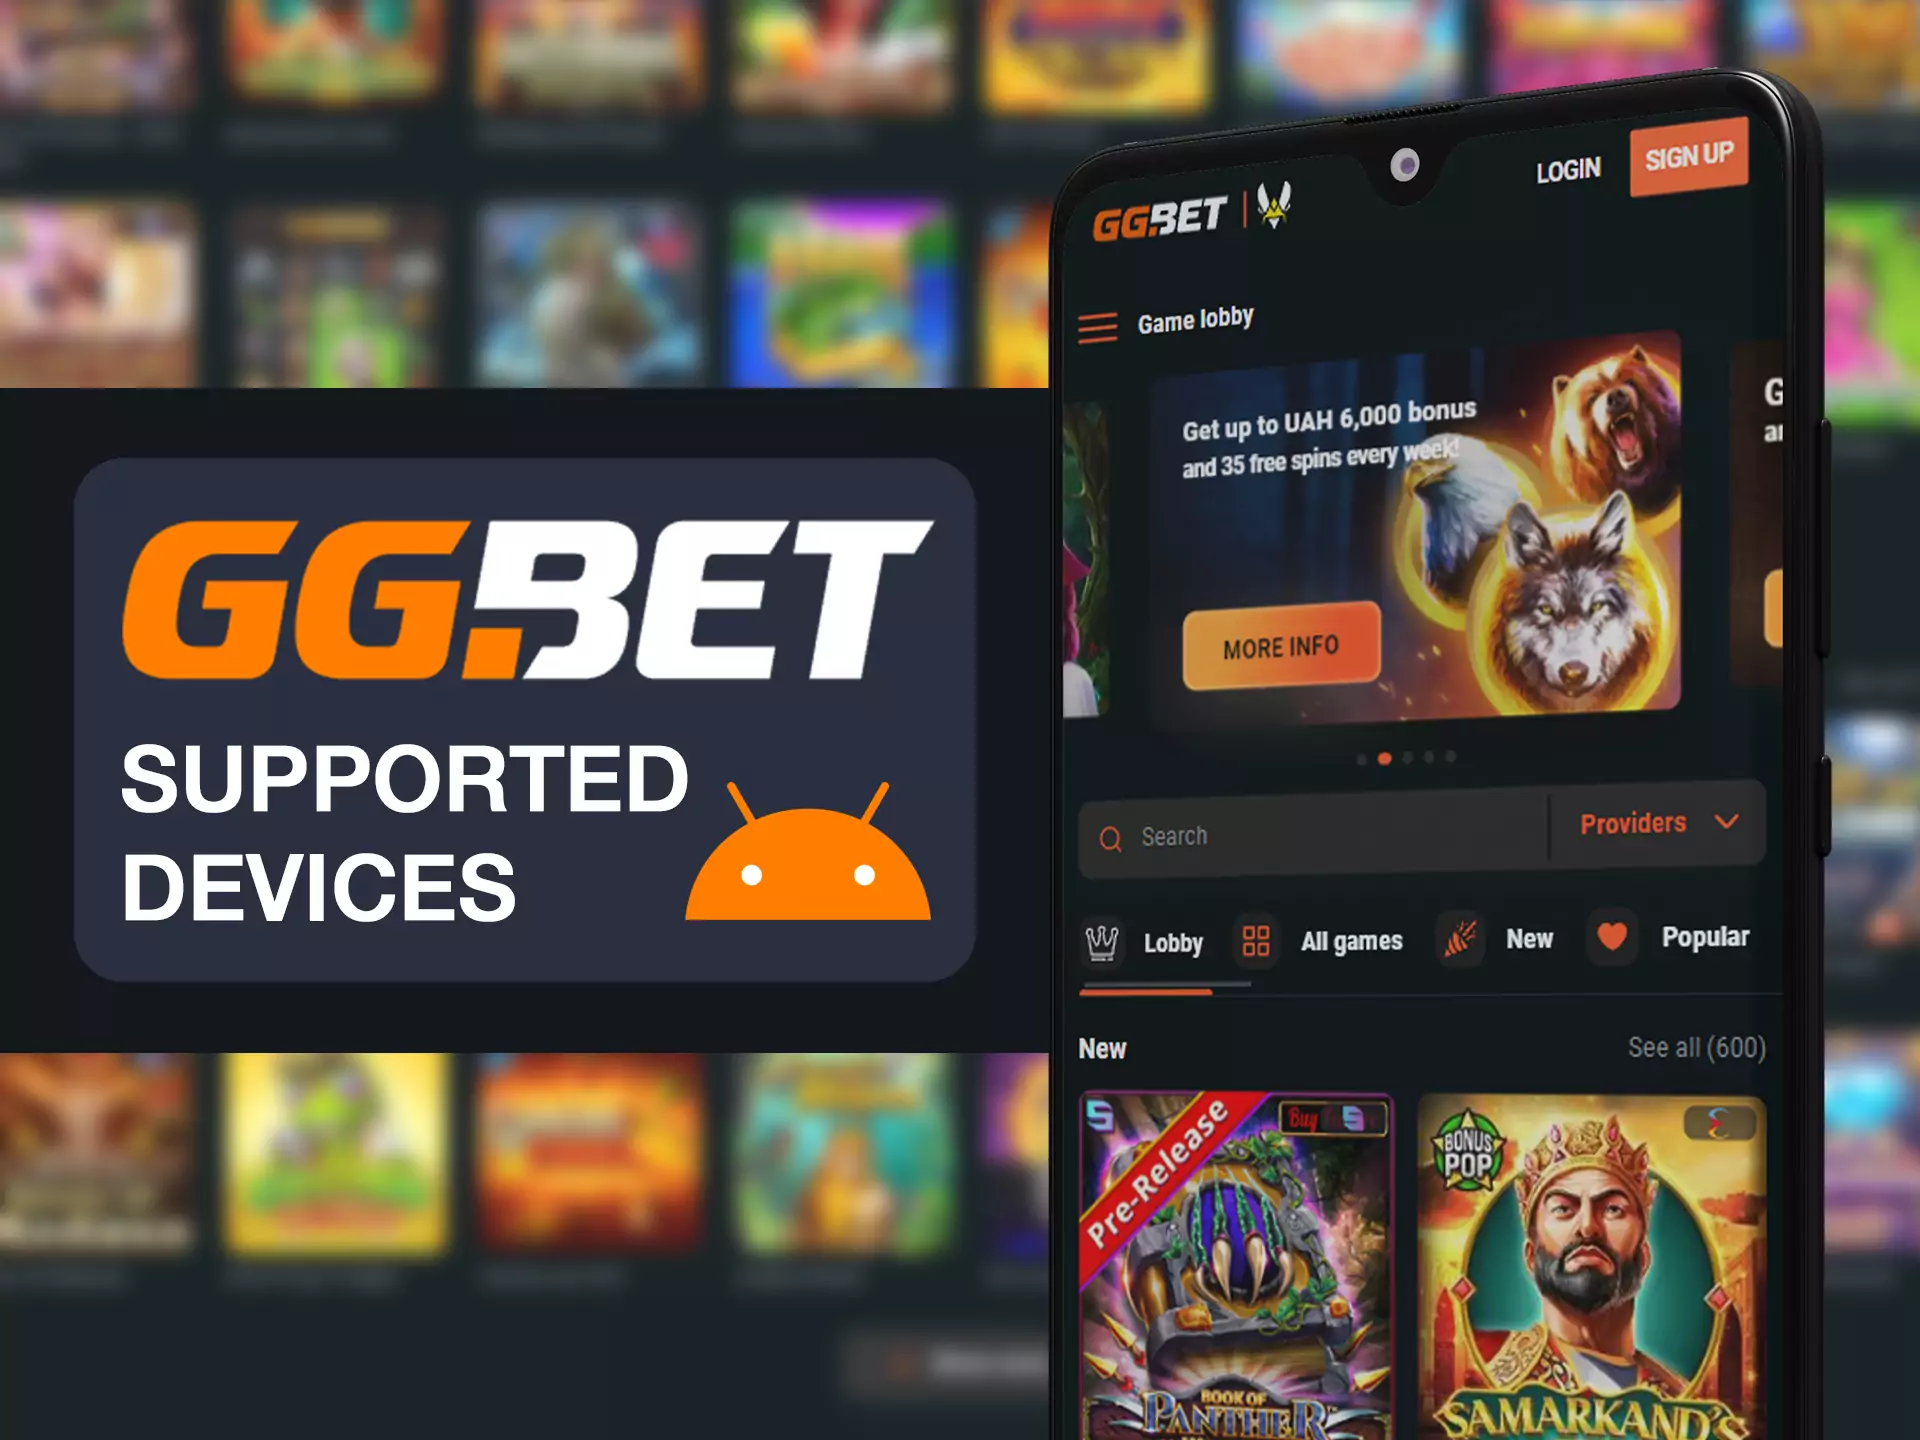 You can install GGBet app on any available Android device.